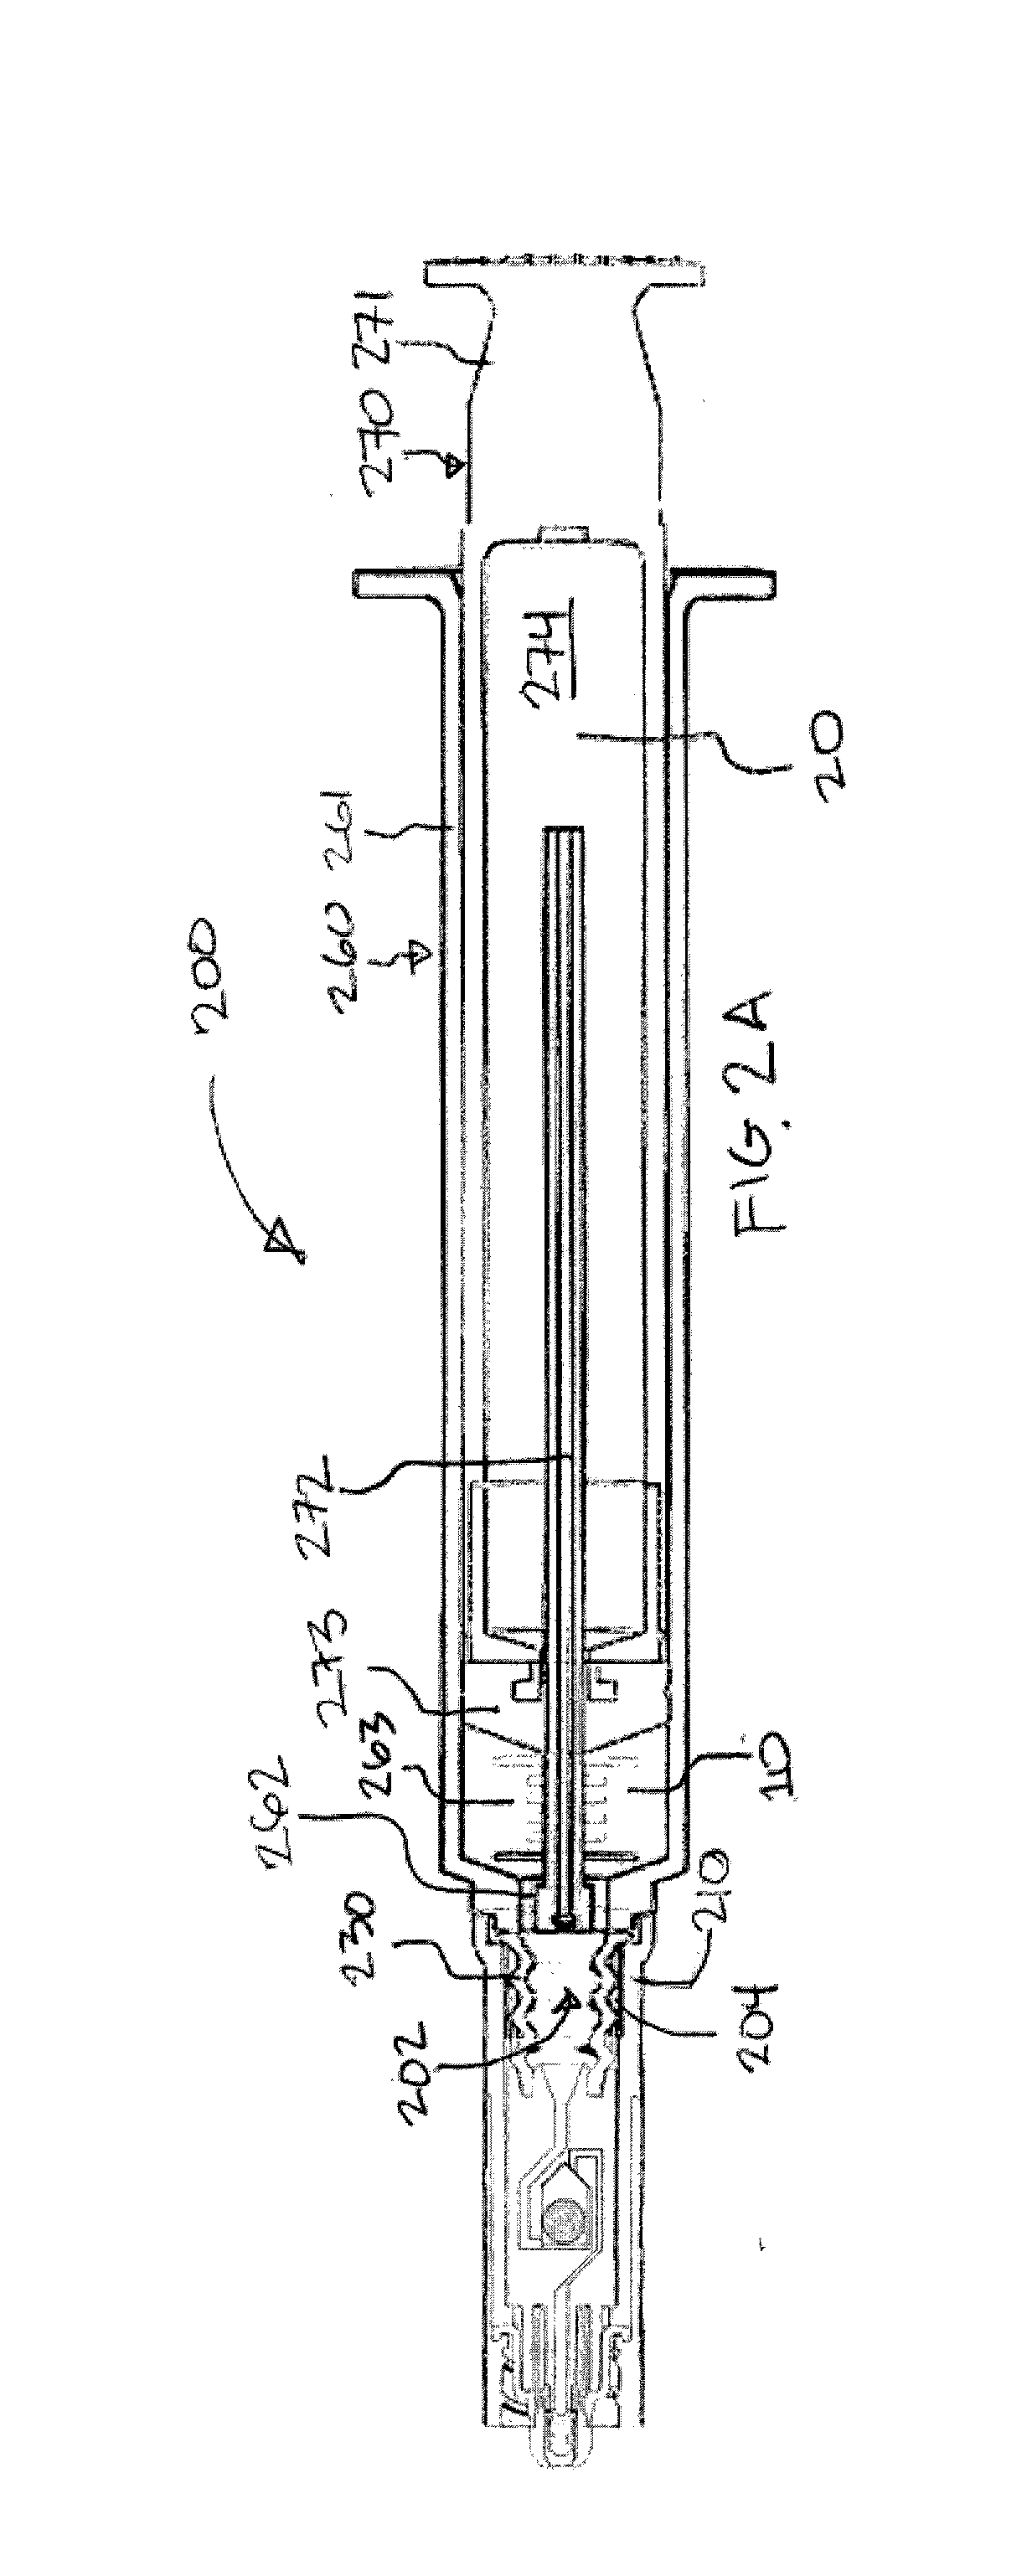 Vial access cap and syringe with gravity-assisted valve